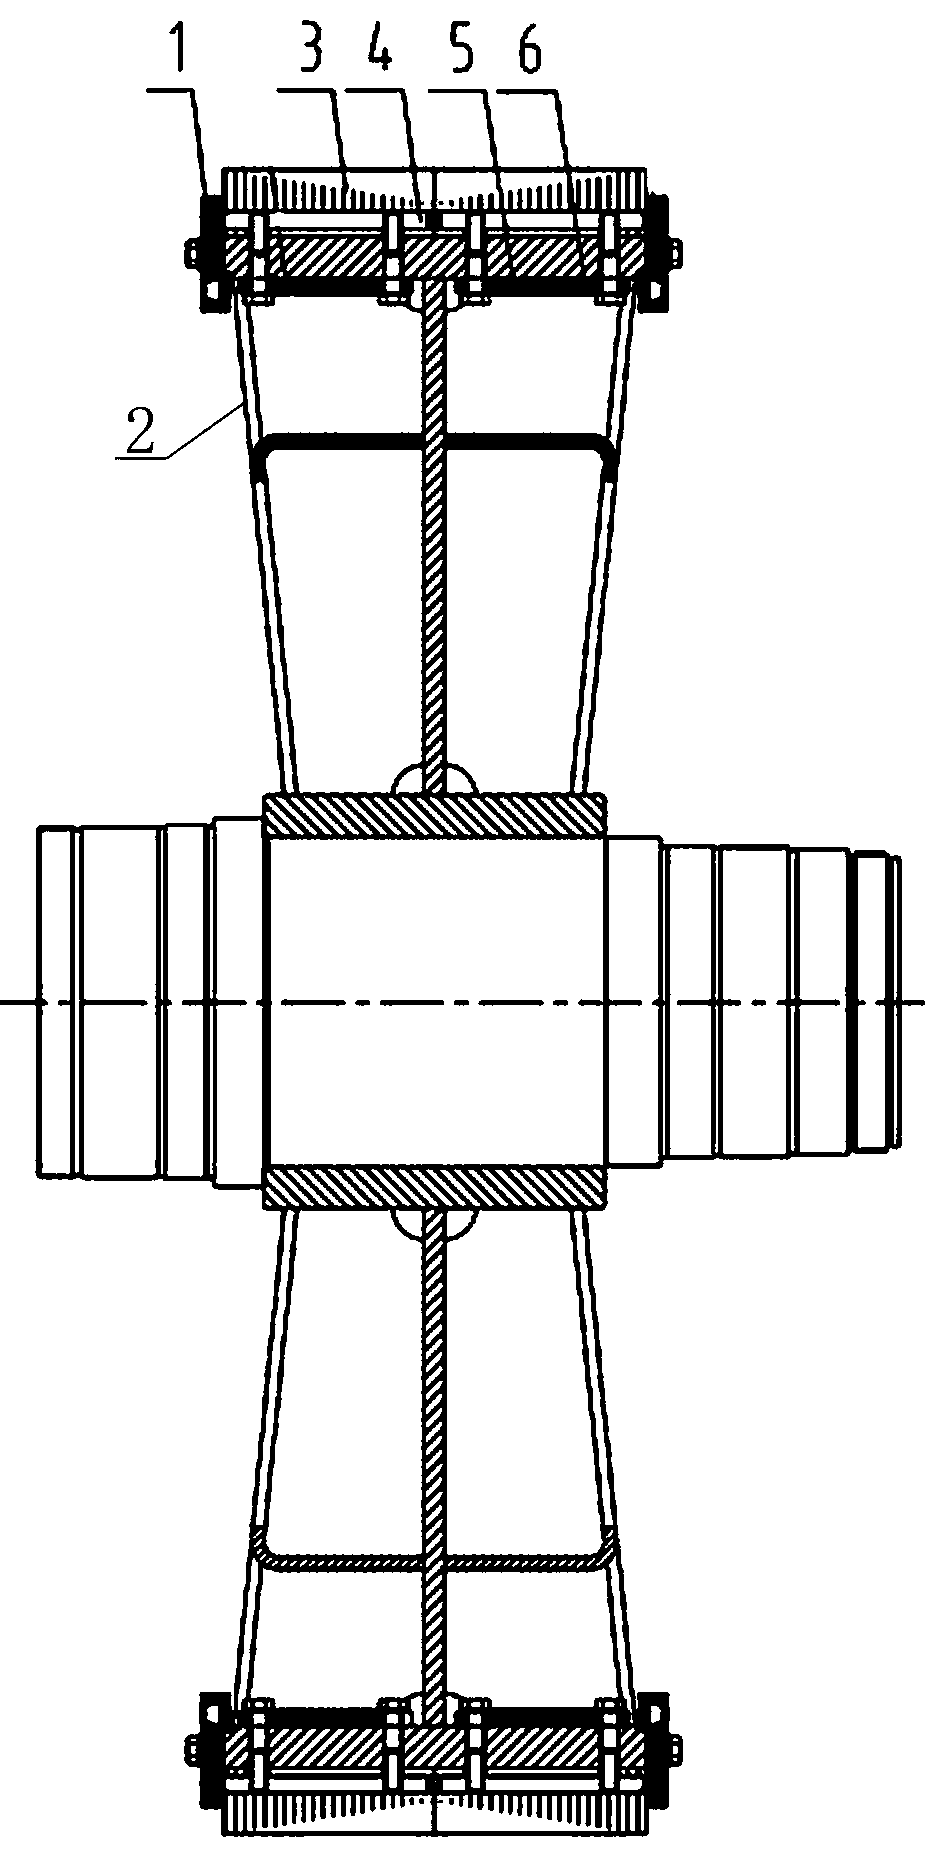 Compact permanent magnet wind generator rotor